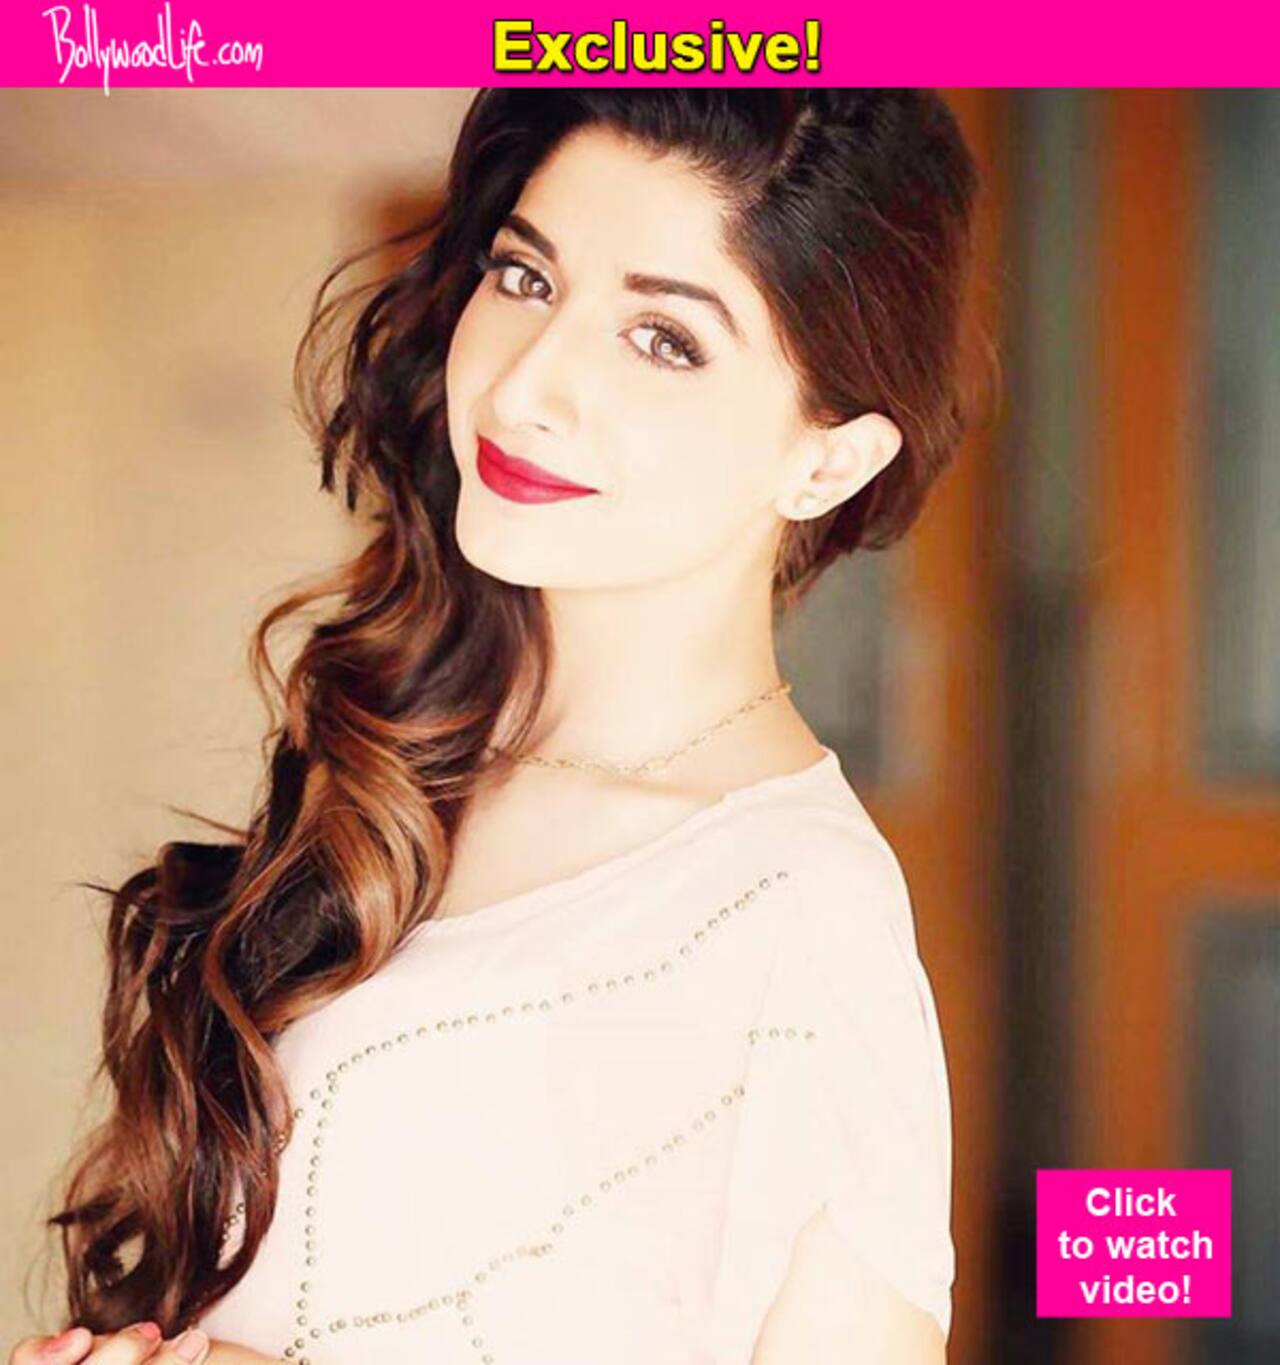 Mawra Hocane of Sanam Teri Kasam talks about the infamous Phantom controversy - watch video!